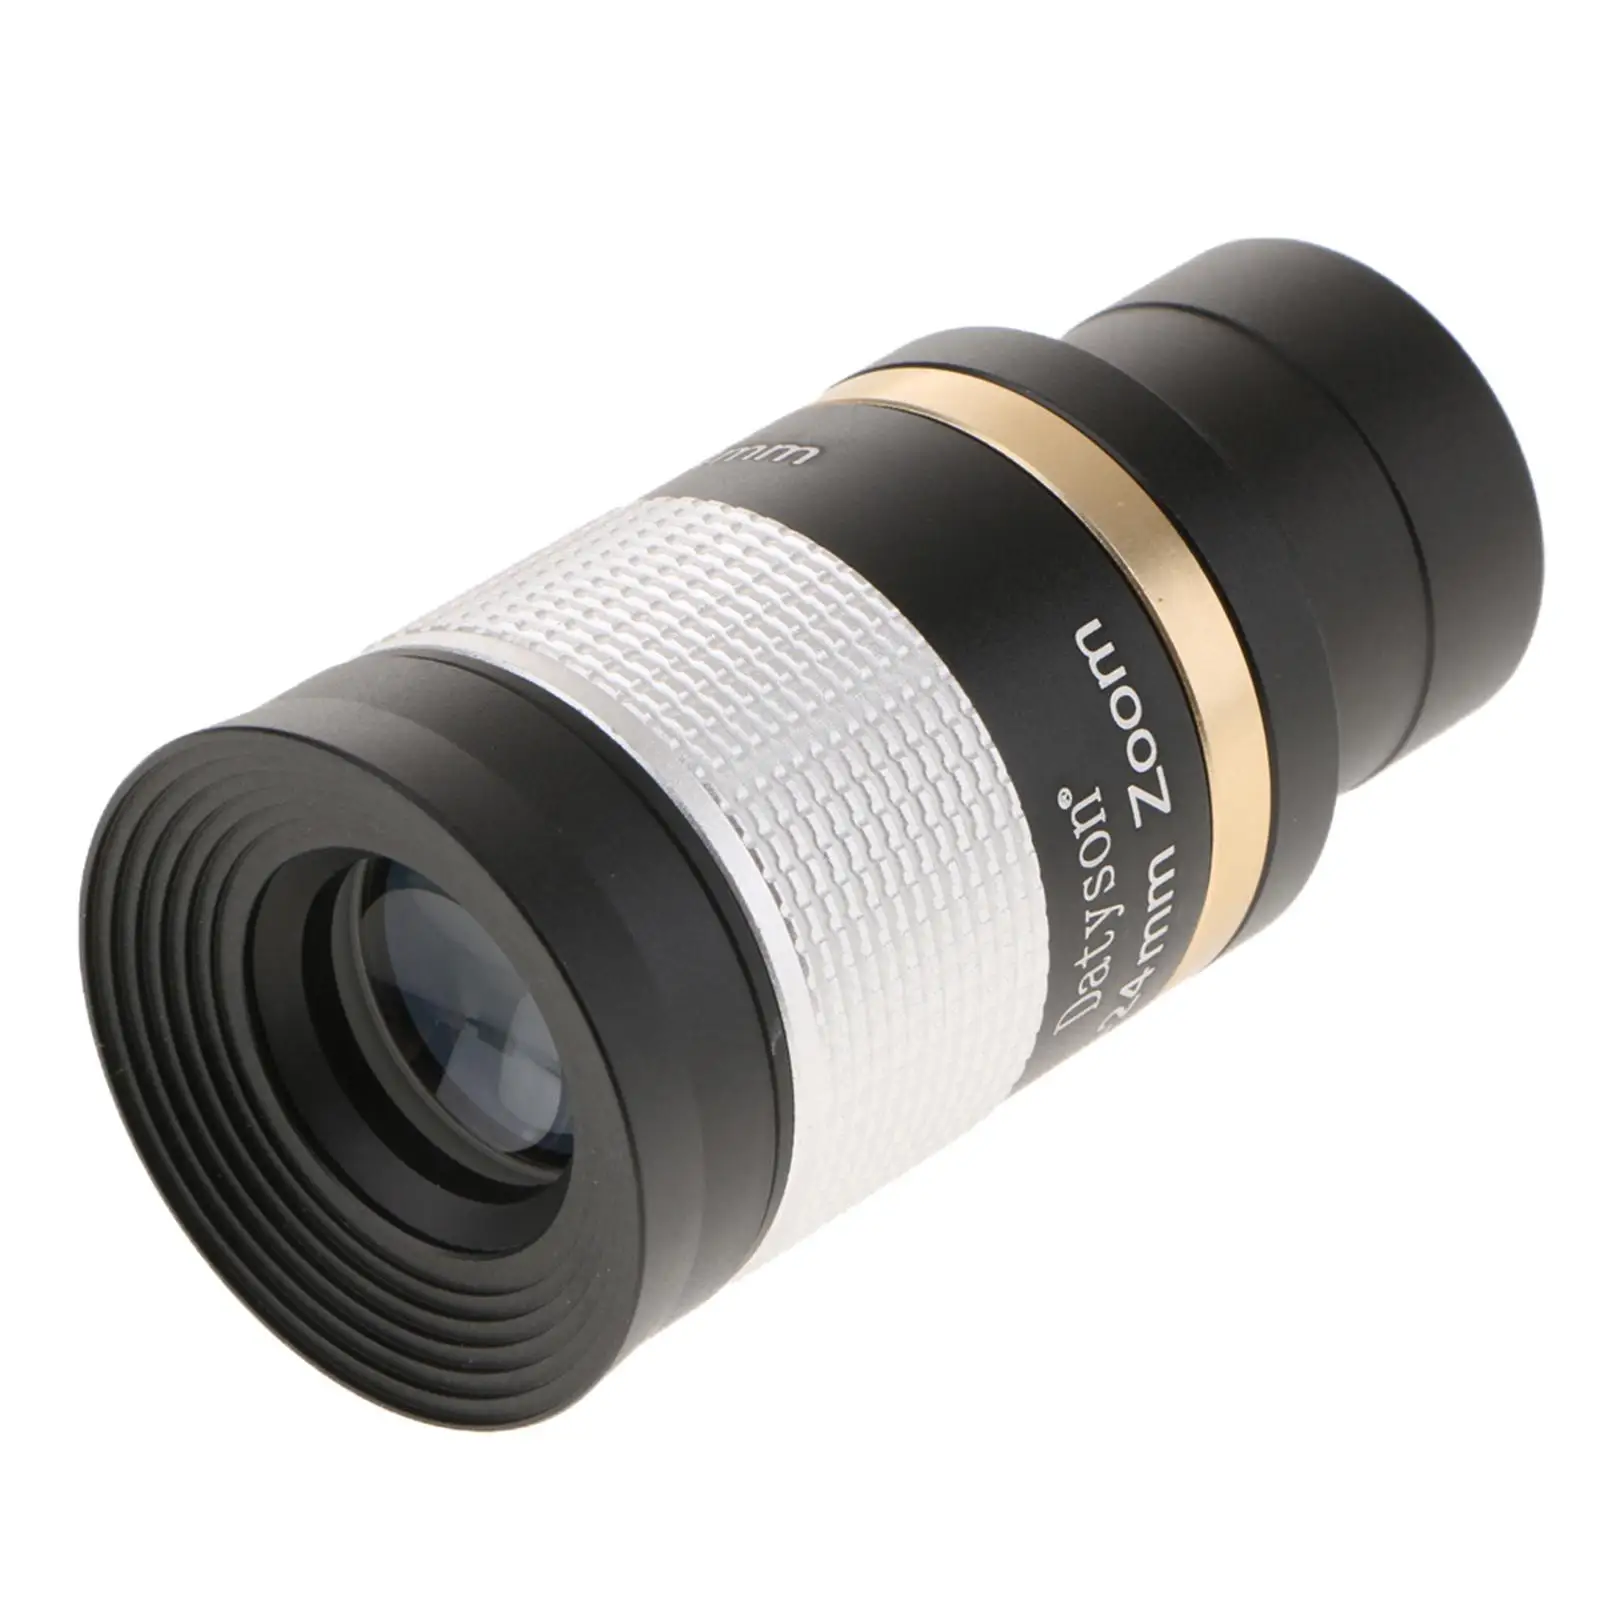 Metal 8-24mm Eyepiece 1.25 inch Multi Coated Optic Lens for Telescope